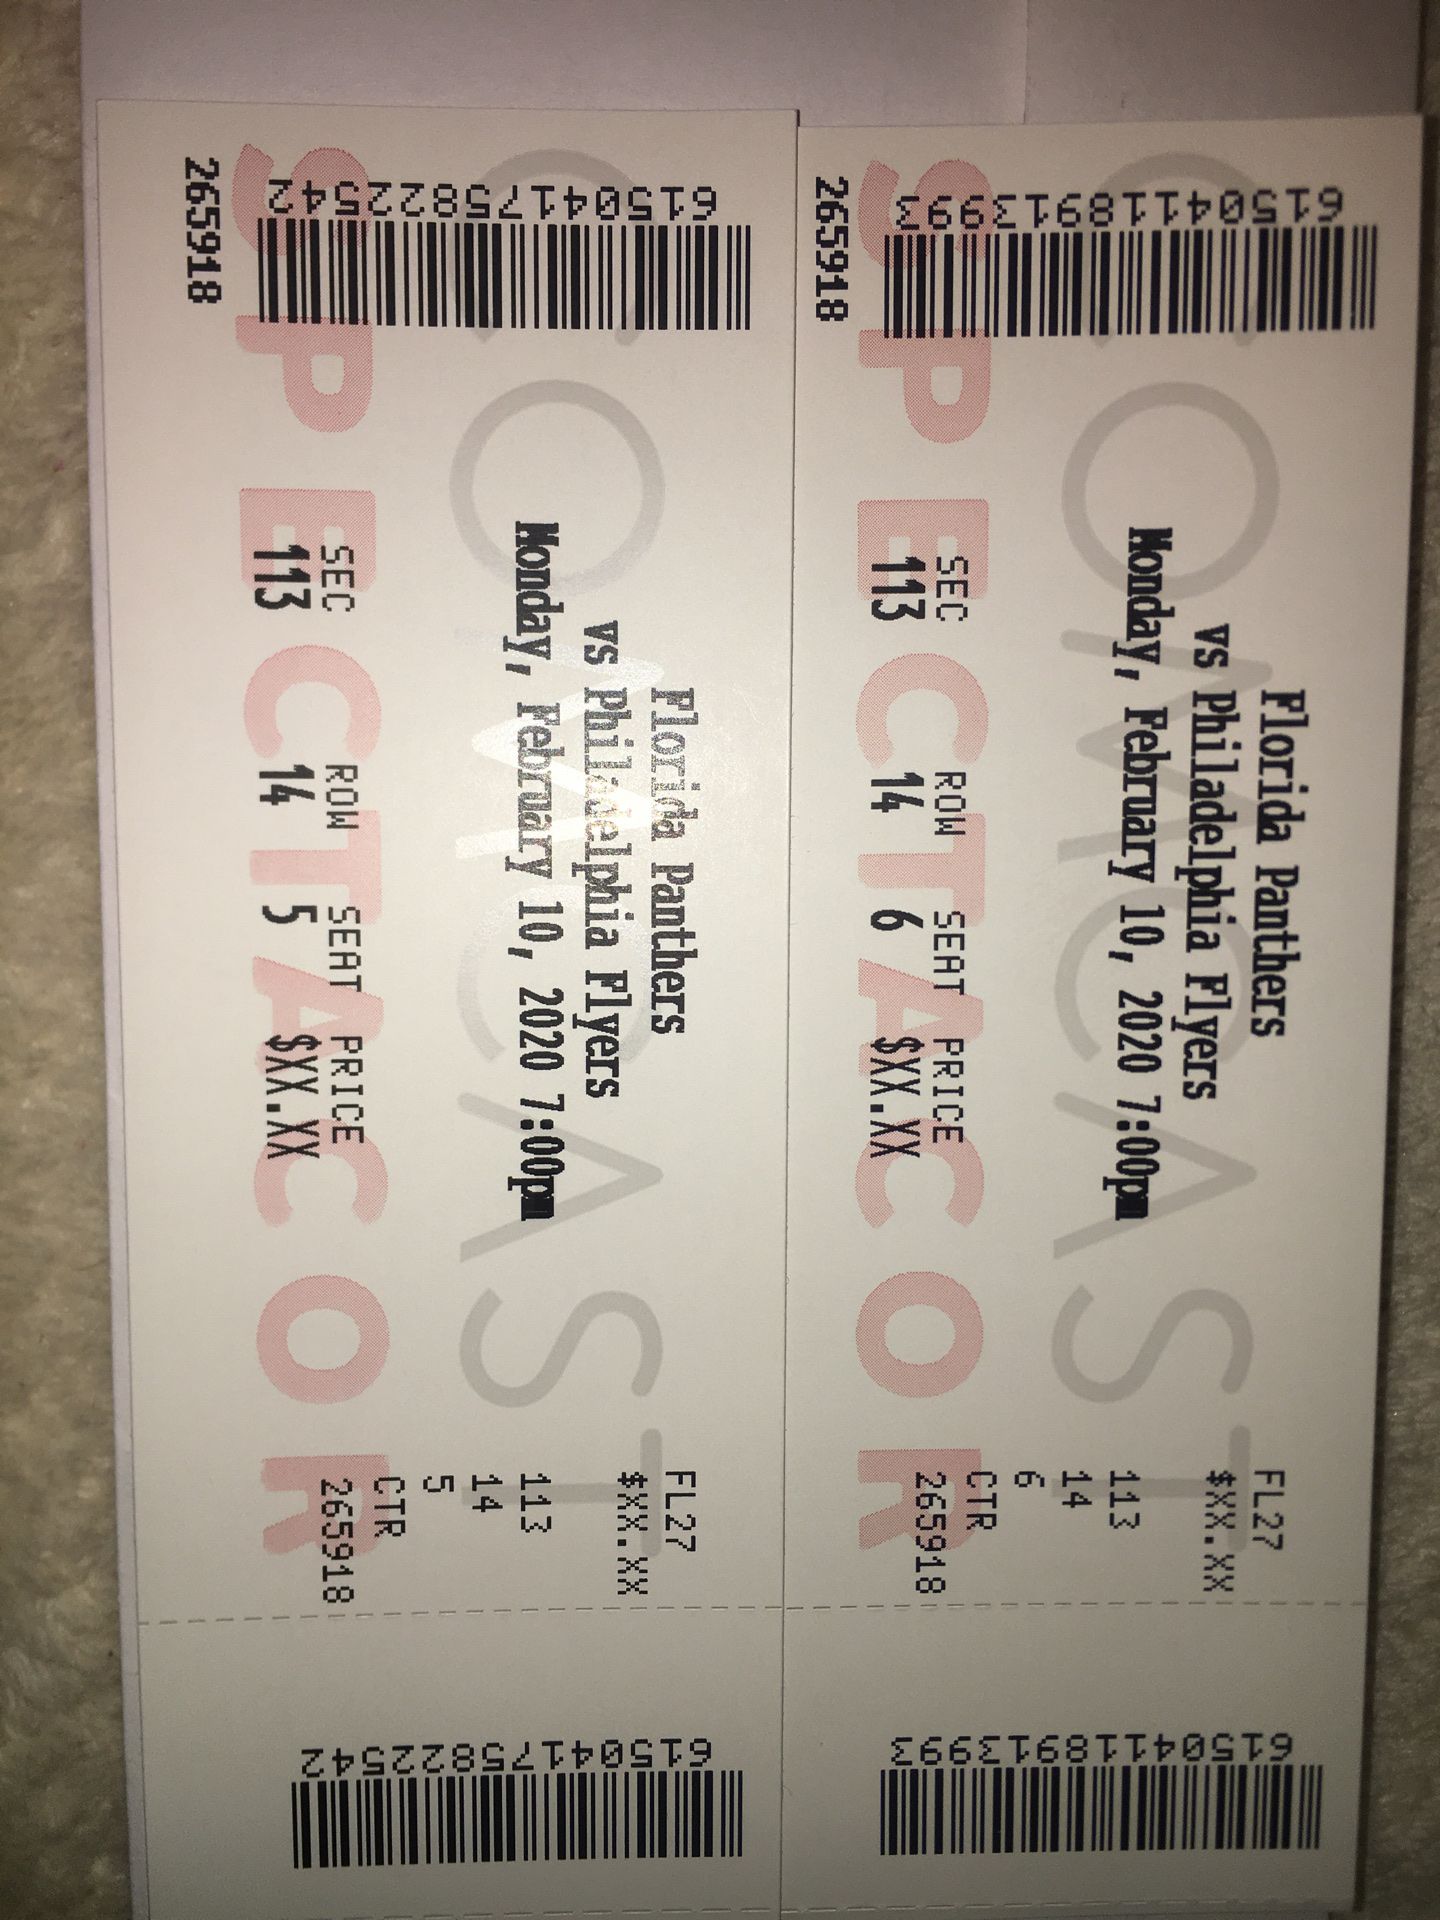 Philadelphia Flyers versus Florida panthers February 10 $225 or best offer